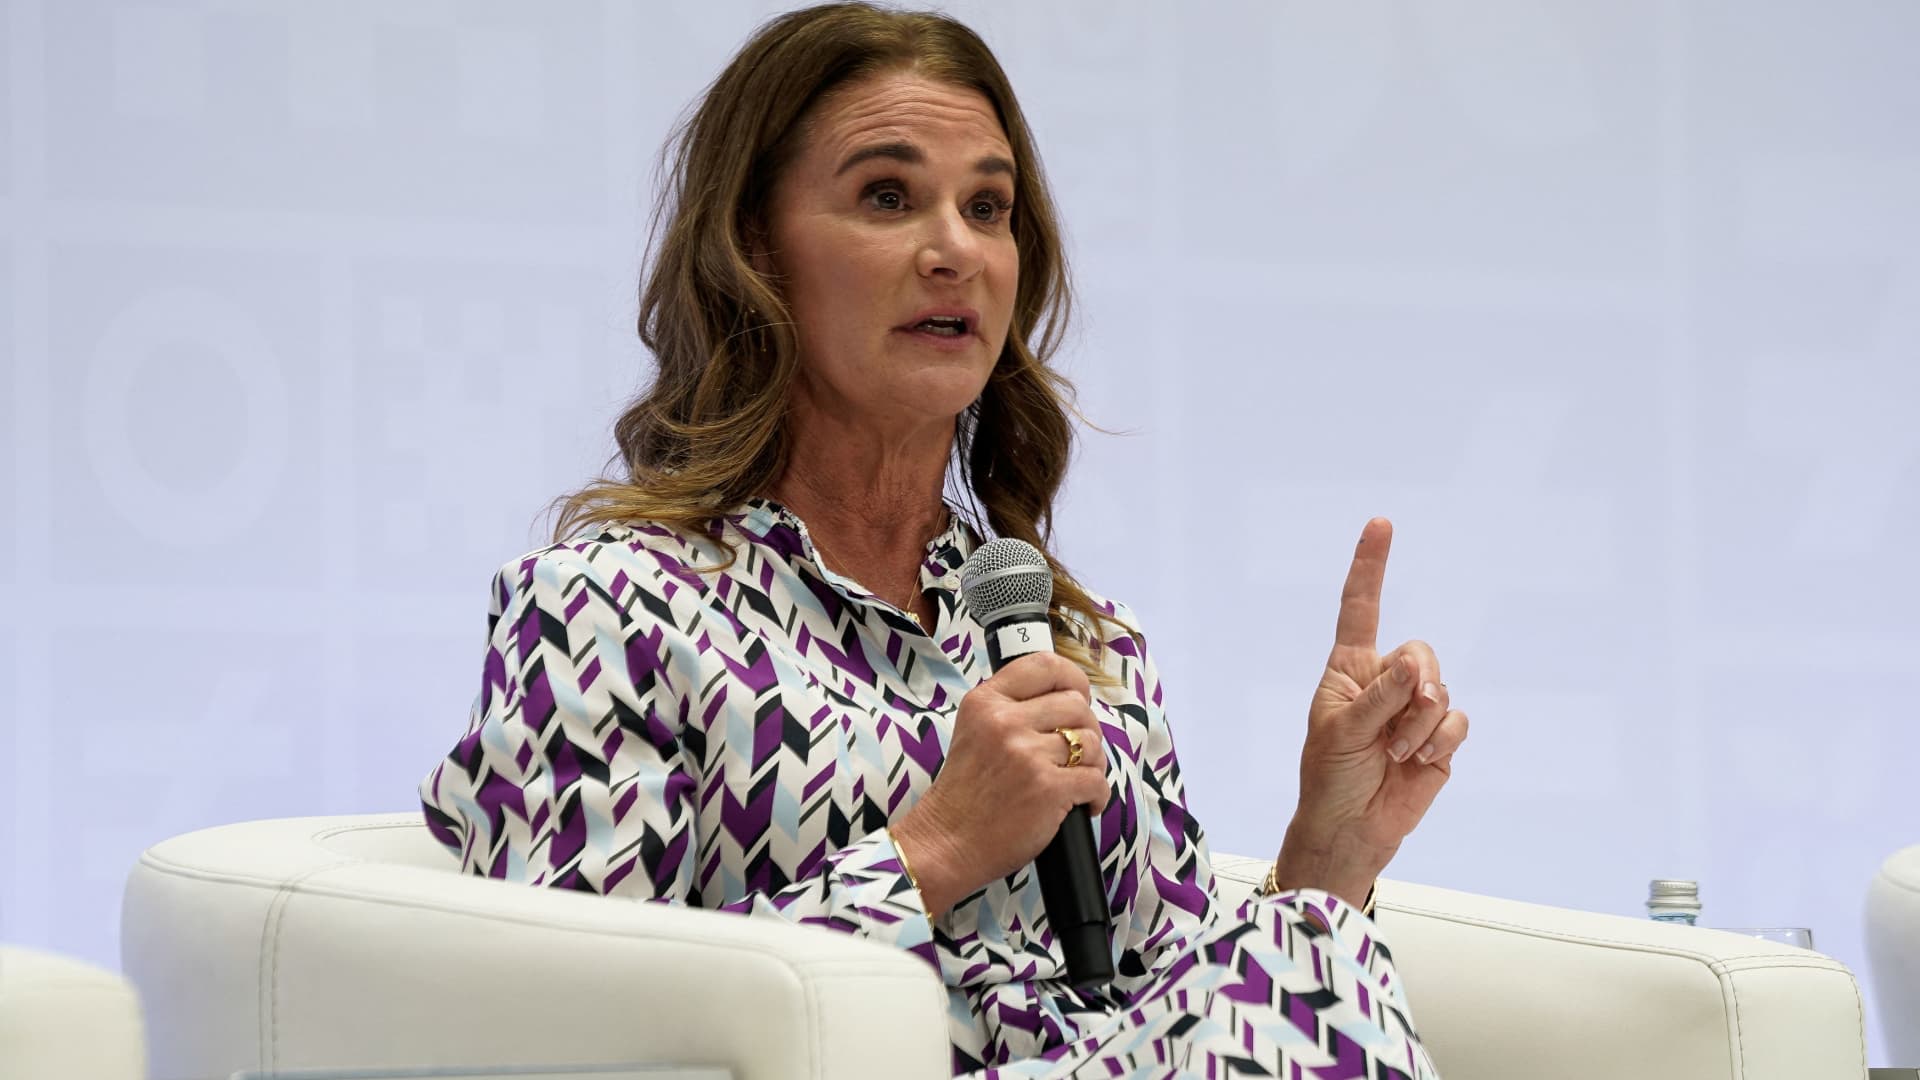 Melinda French Gates recreated her 'very middle-class' upbringing to raise her 3 kids: 'I thought that was a good principle to have'